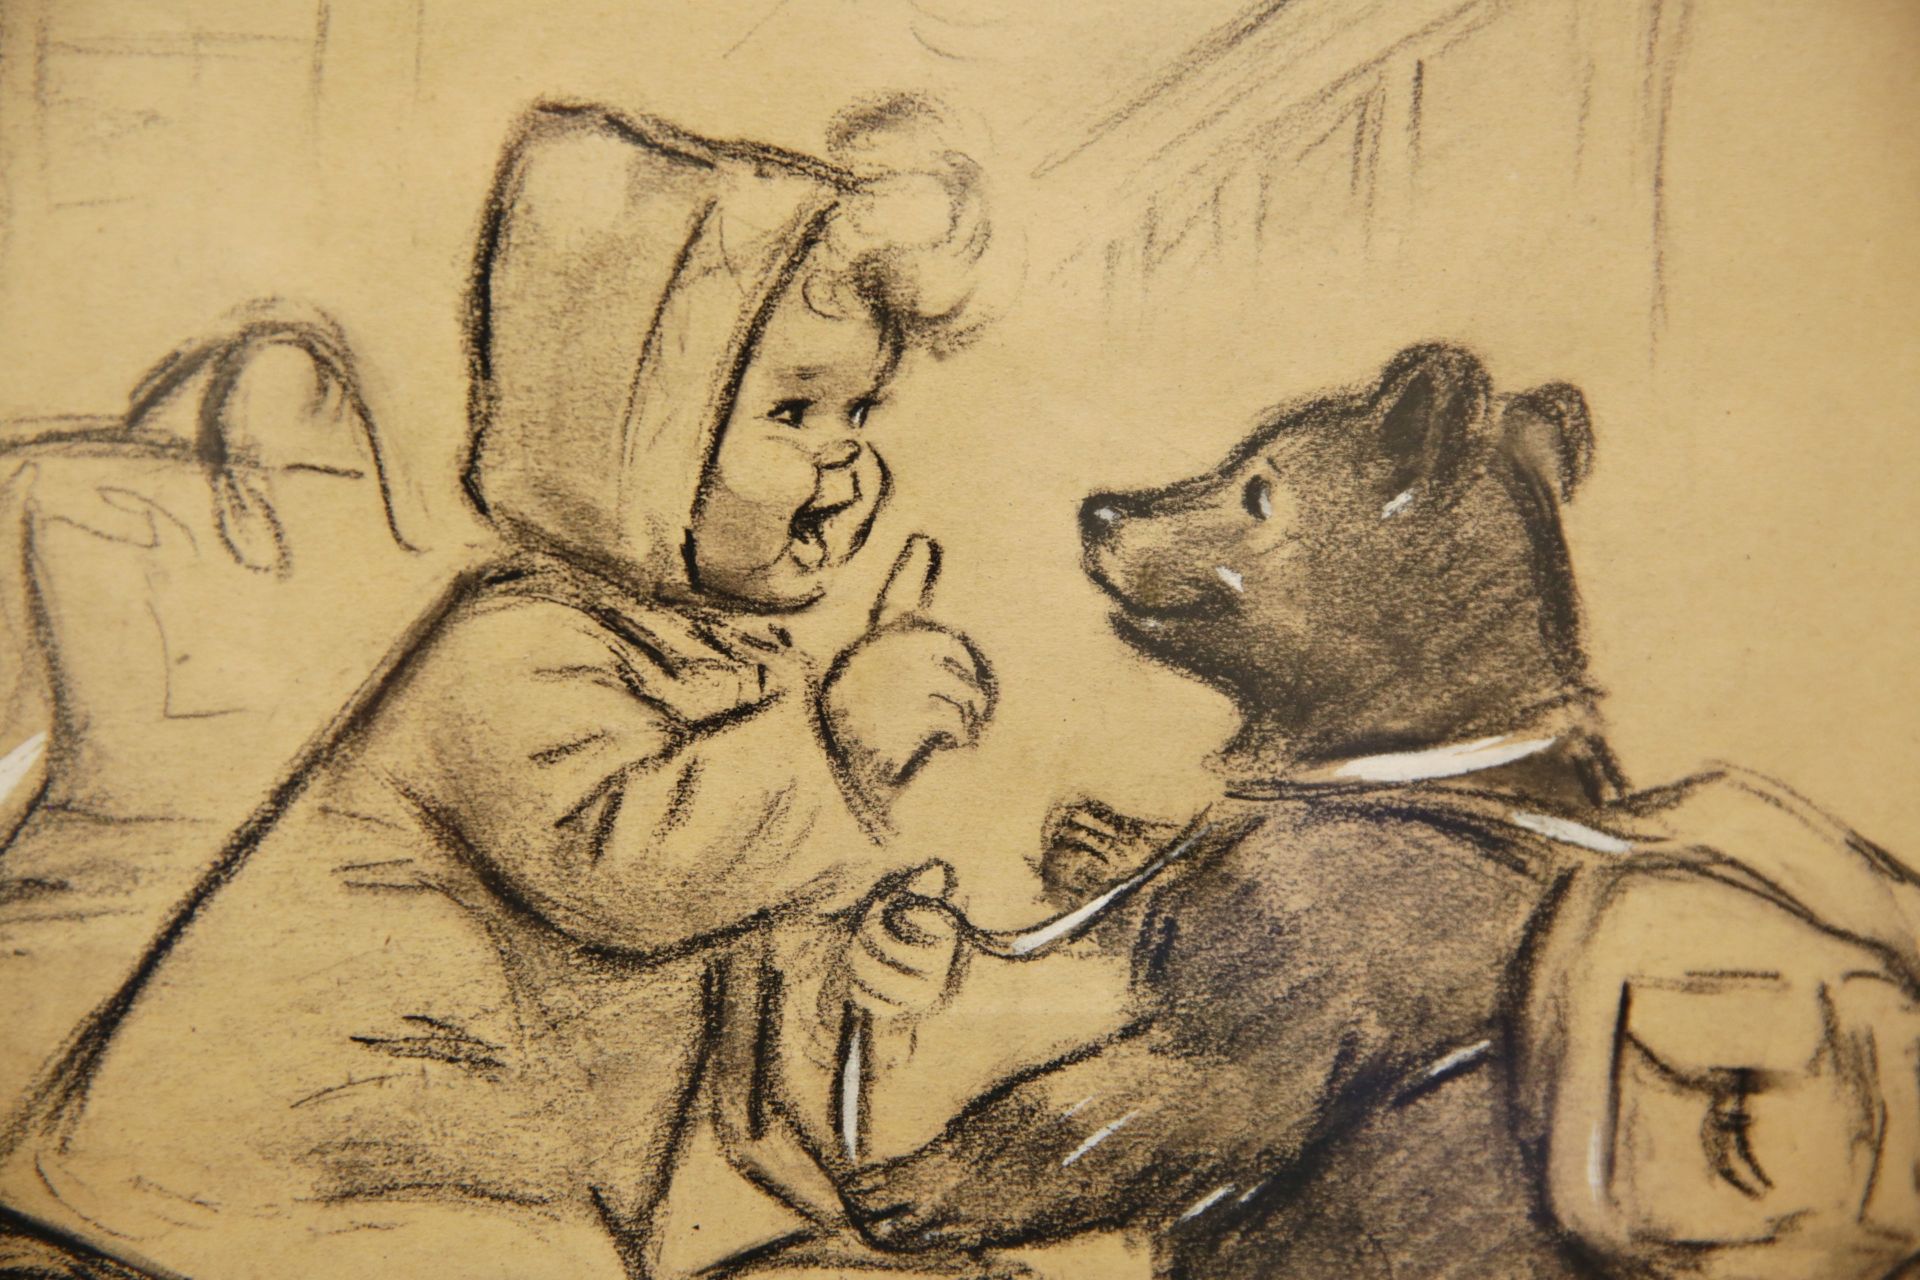 Germaine BOURET (1907-1953) "Child and bear", charcoal drawing and gouache, French, 20th C. - Image 4 of 6